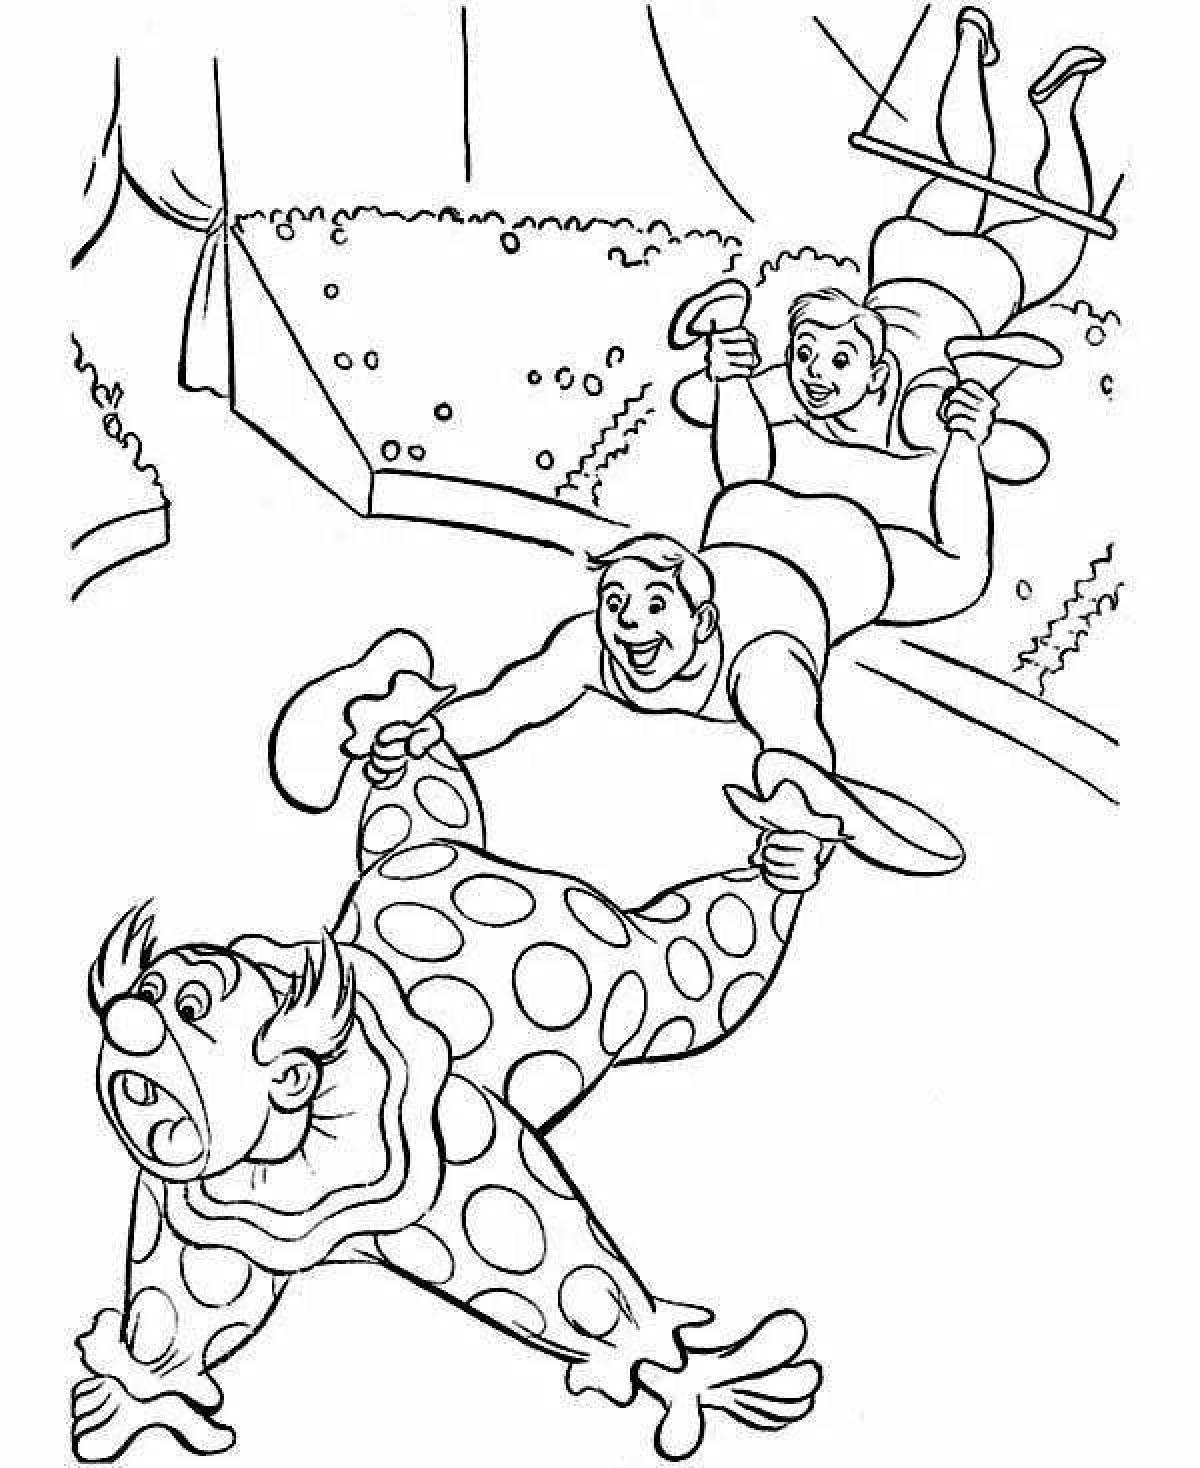 Fantastic circus coloring book for kids 6-7 years old